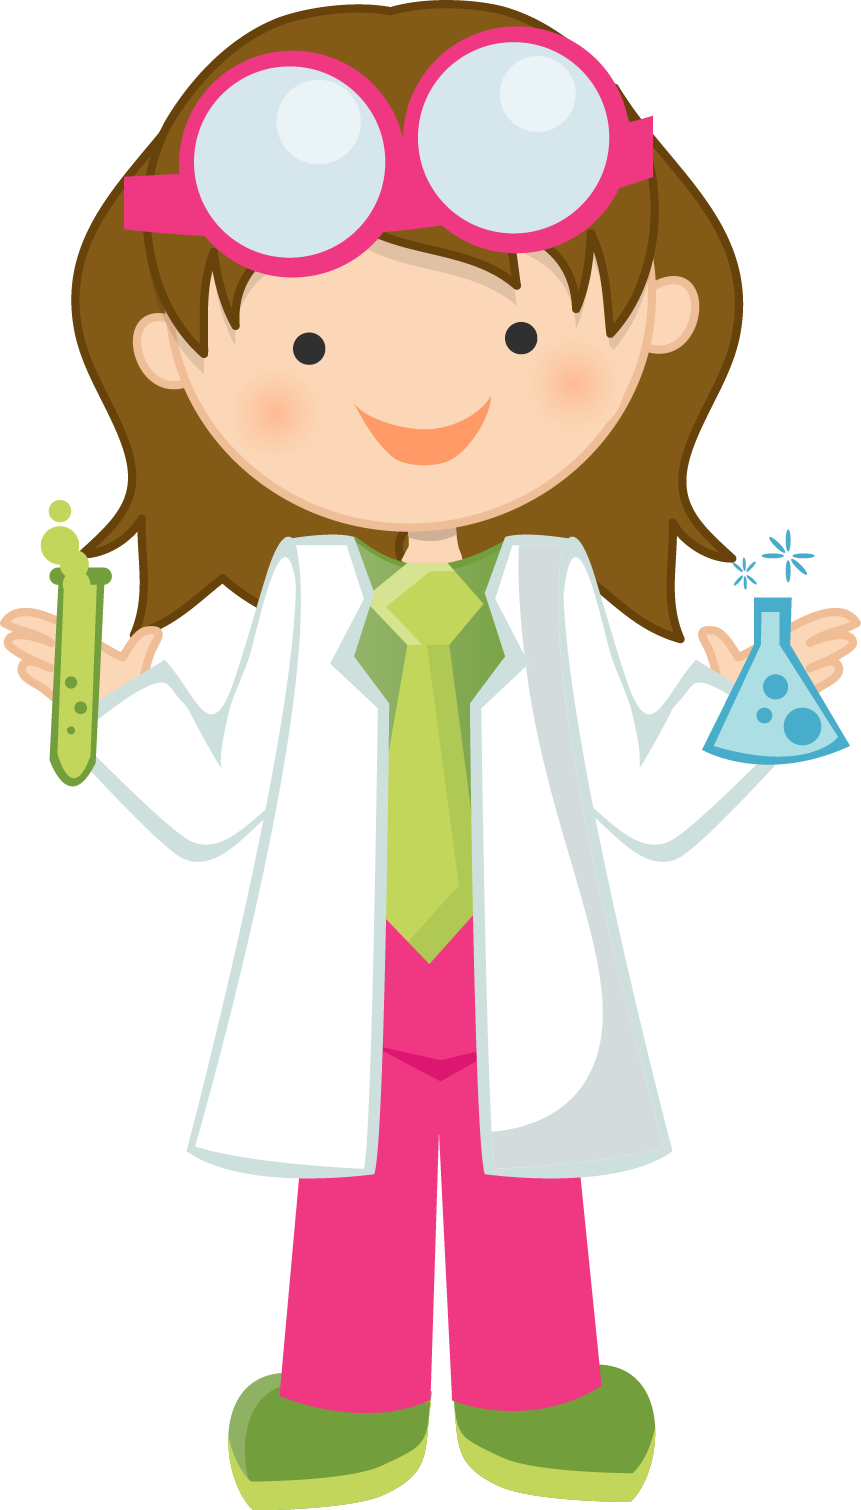 Clipart of science girl ponytail - ClipartFox